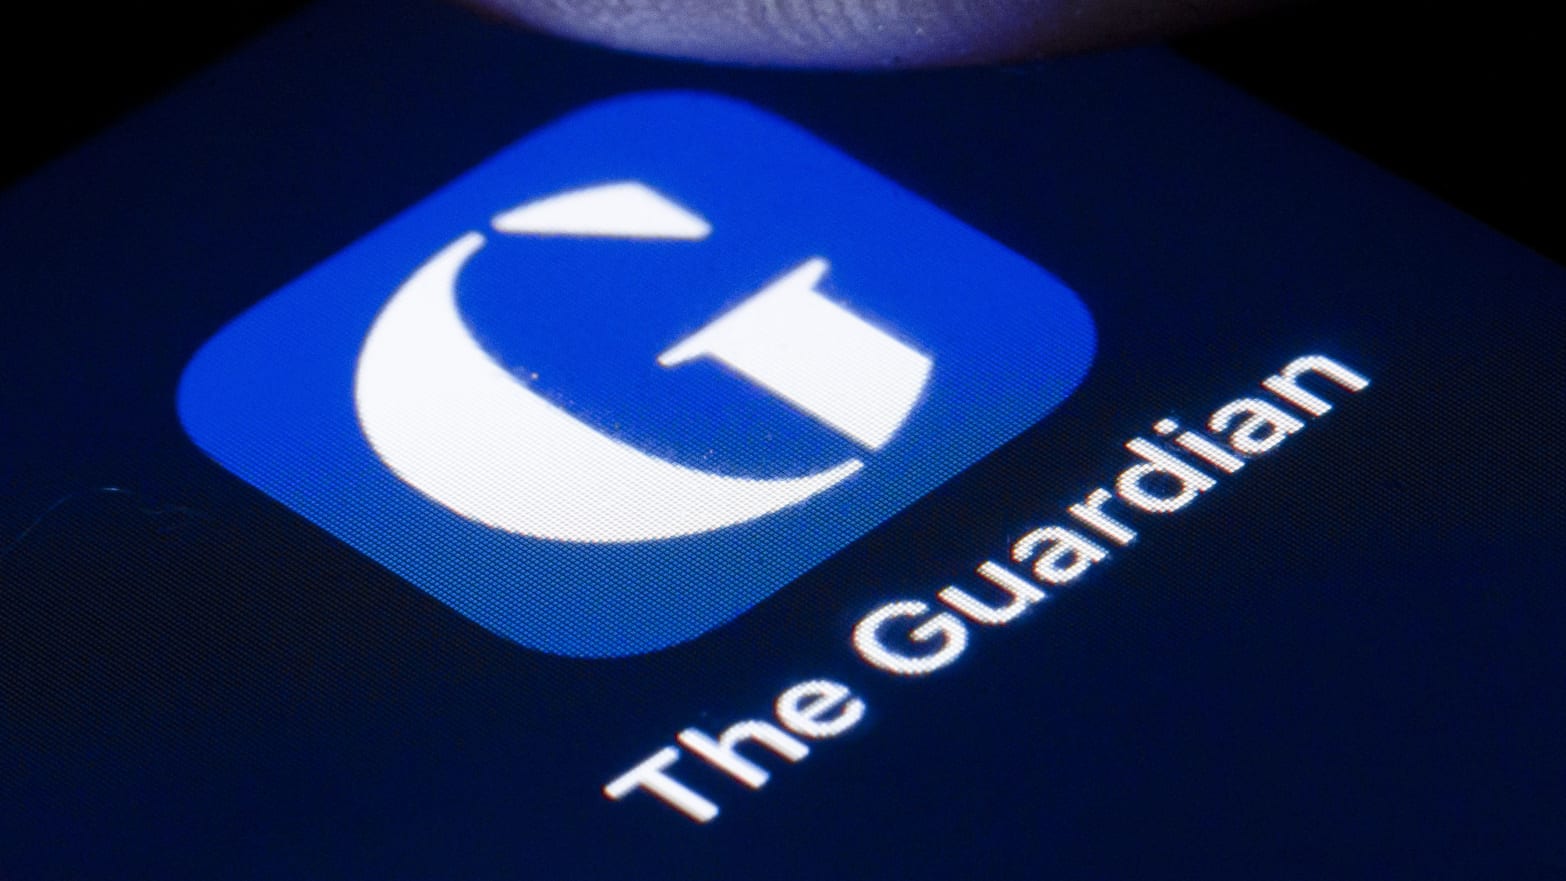 The logo of The Guardian.